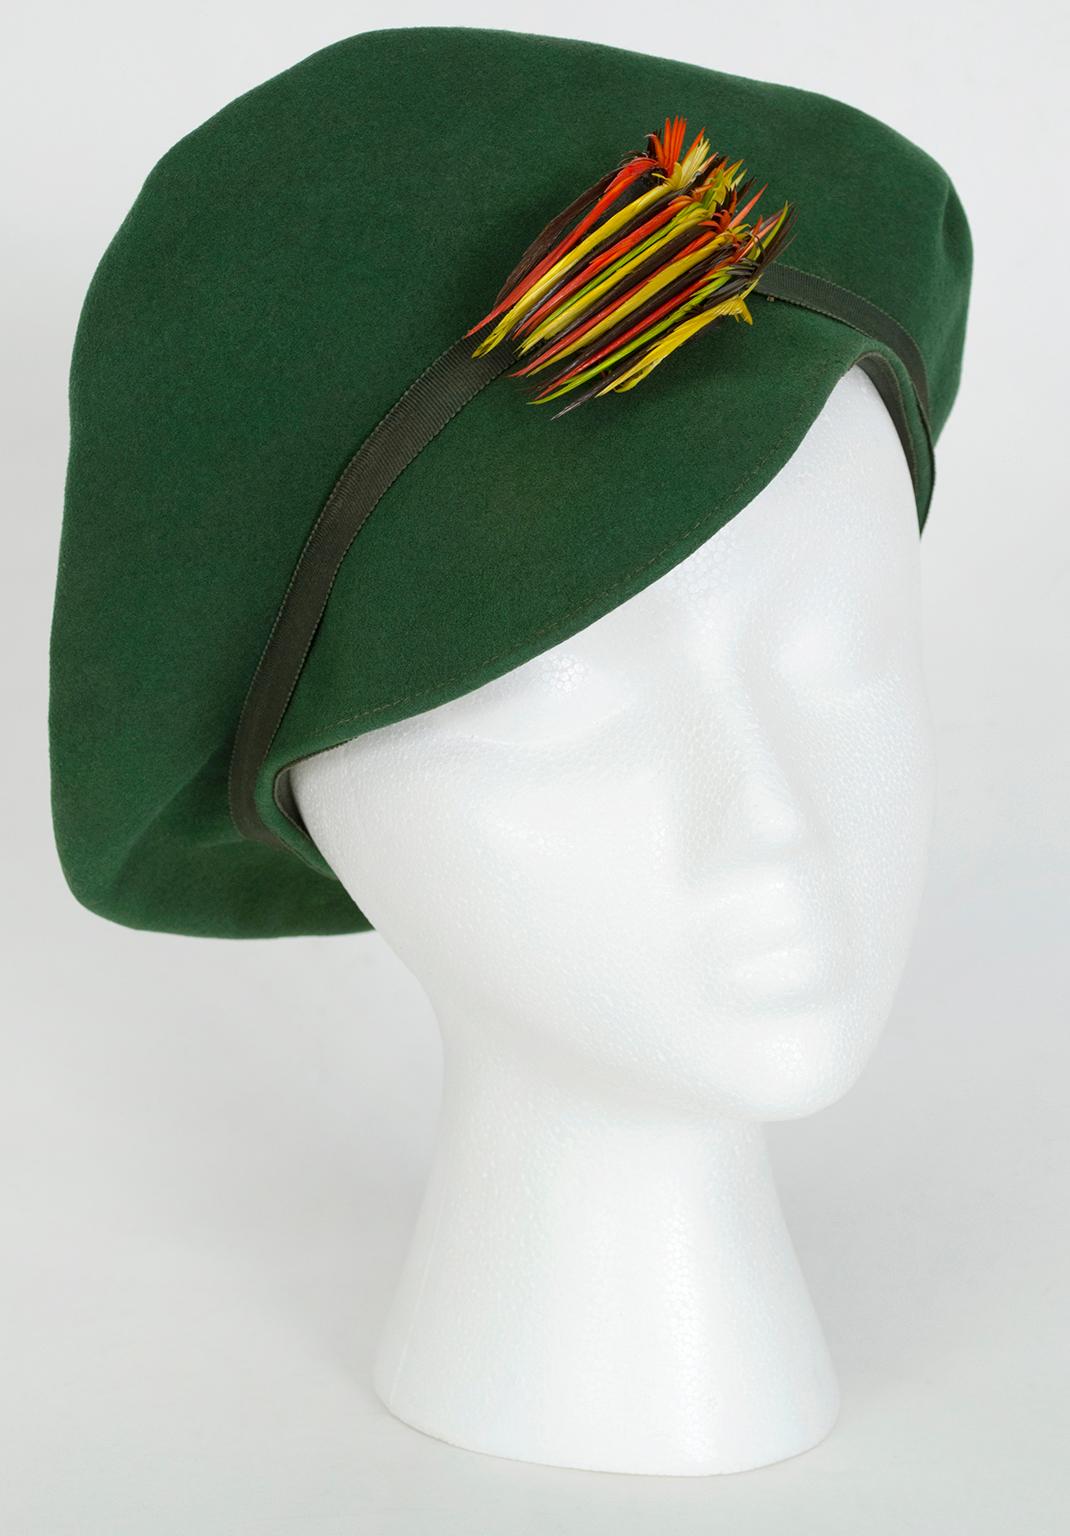 A hat with an unusual kick of saturated color can be just the punctuation a neutral outfit needs. This one, with its claw-like cockscomb, provides punch and playfulness all in one.

Hunter green brevet with front bill and ½” grosgrain band with left